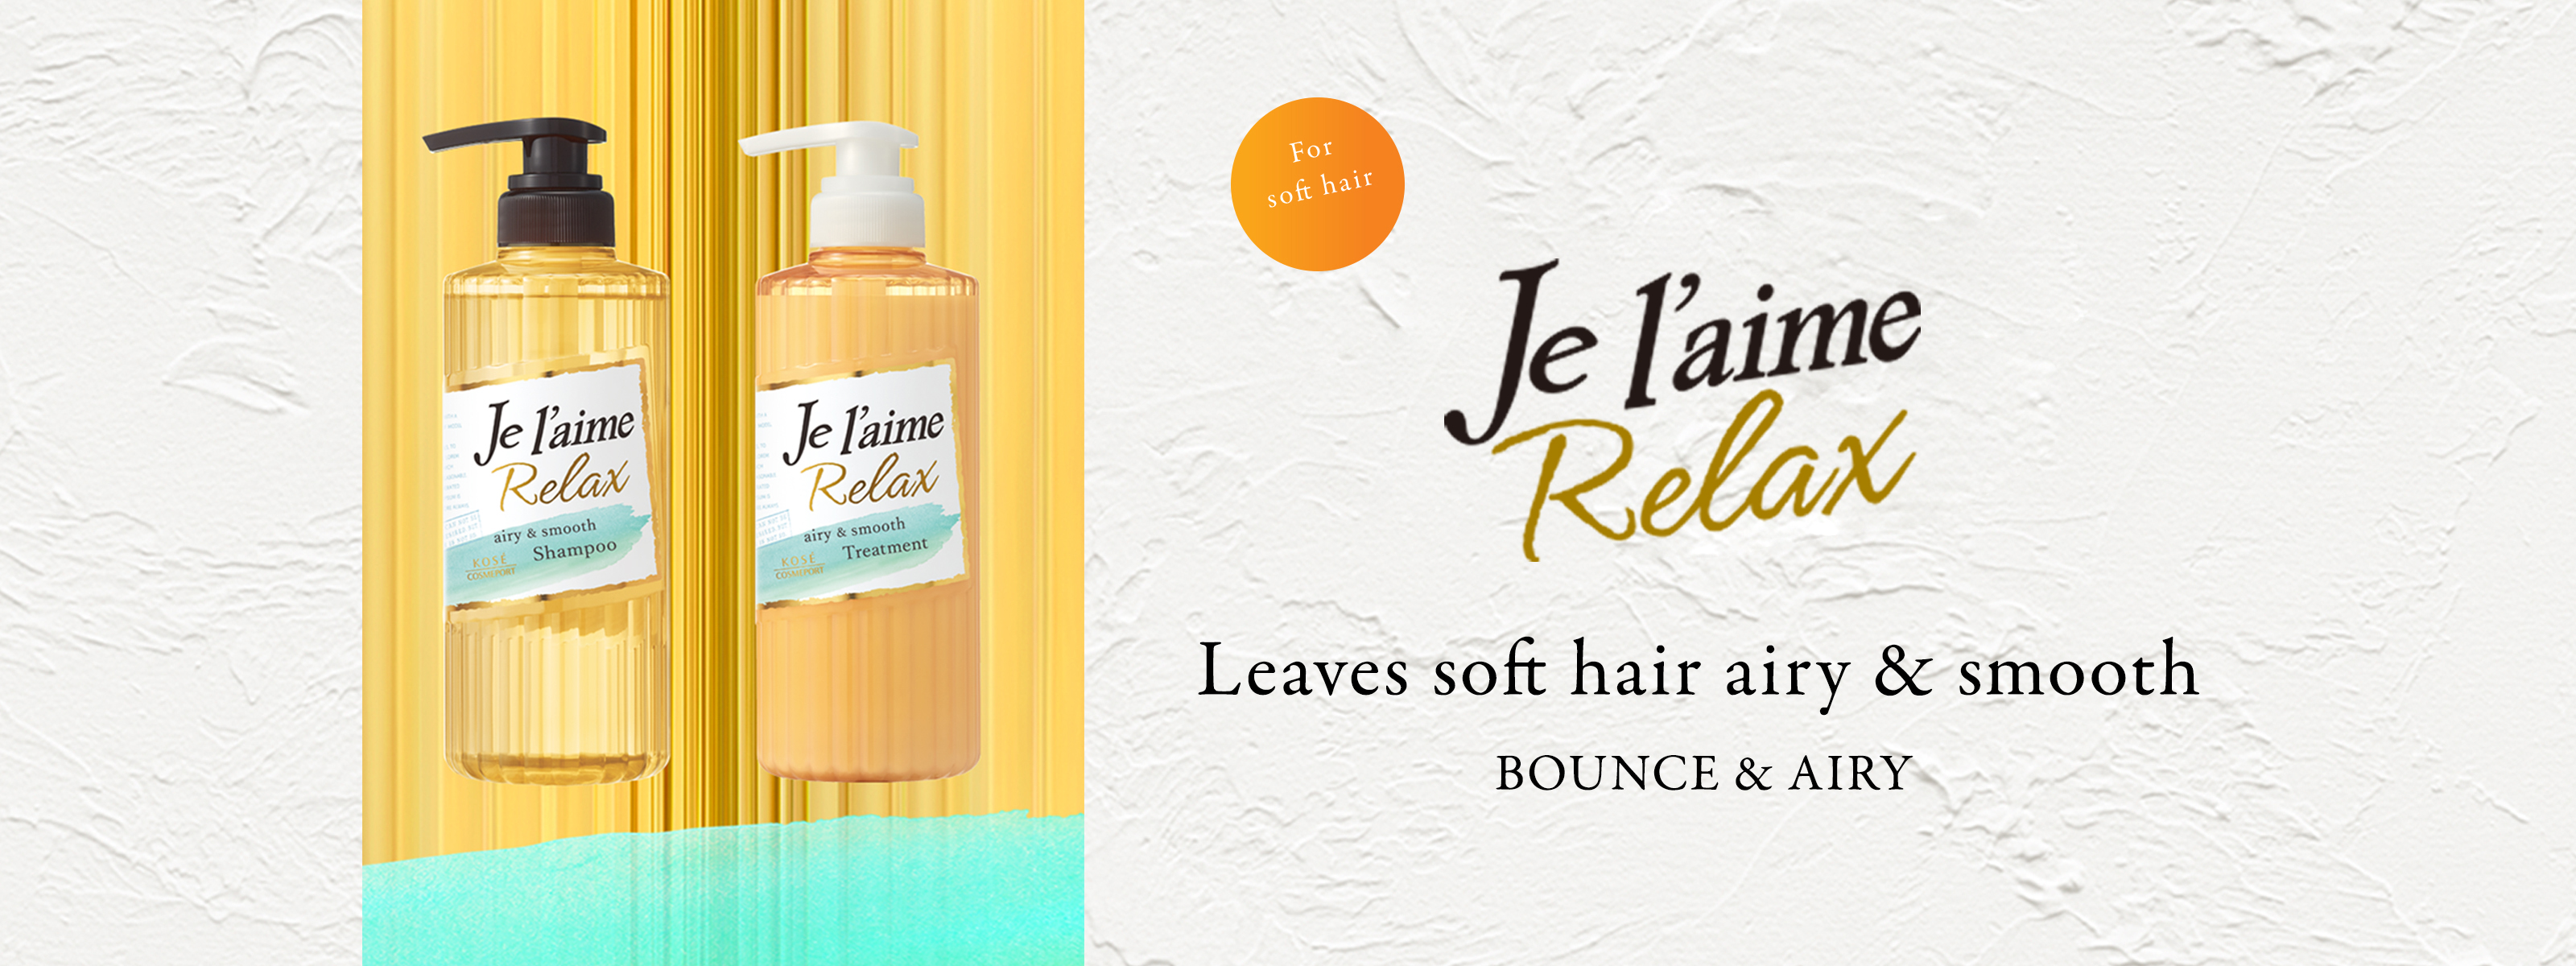 New Je l'aime Relax Even soft hair becomes airy, smooth, and manageable!